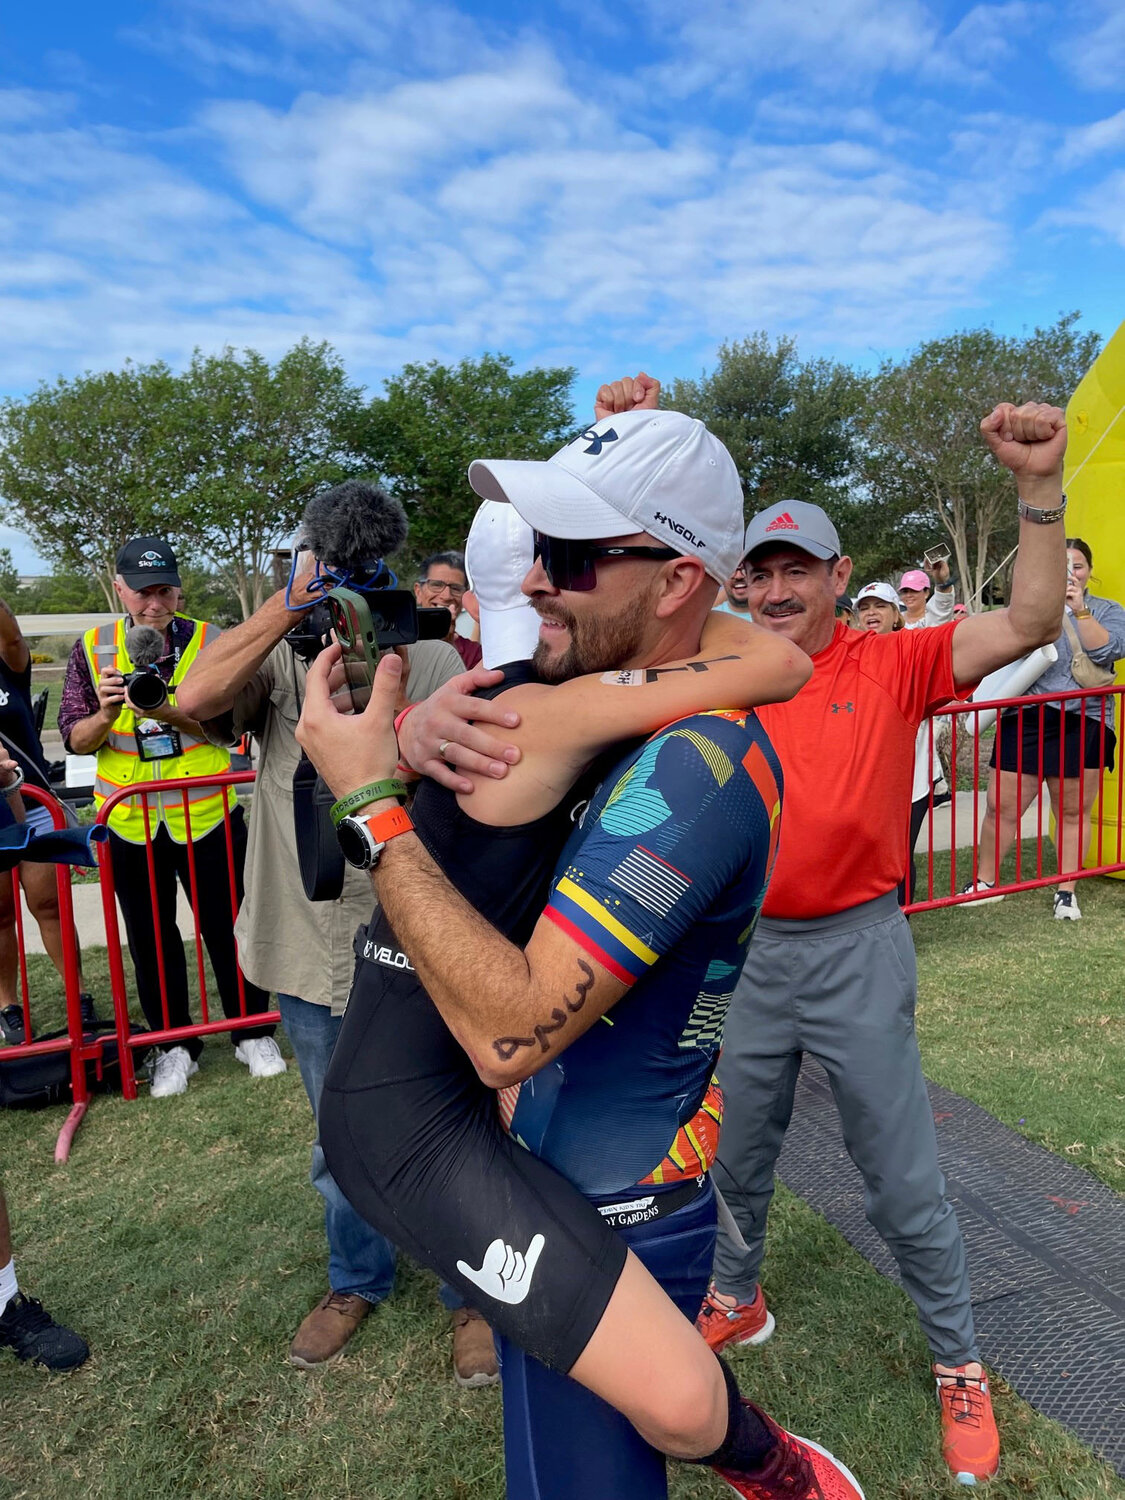 After completing the triathlon, Nico is embraced by his father, Christian Reyes.